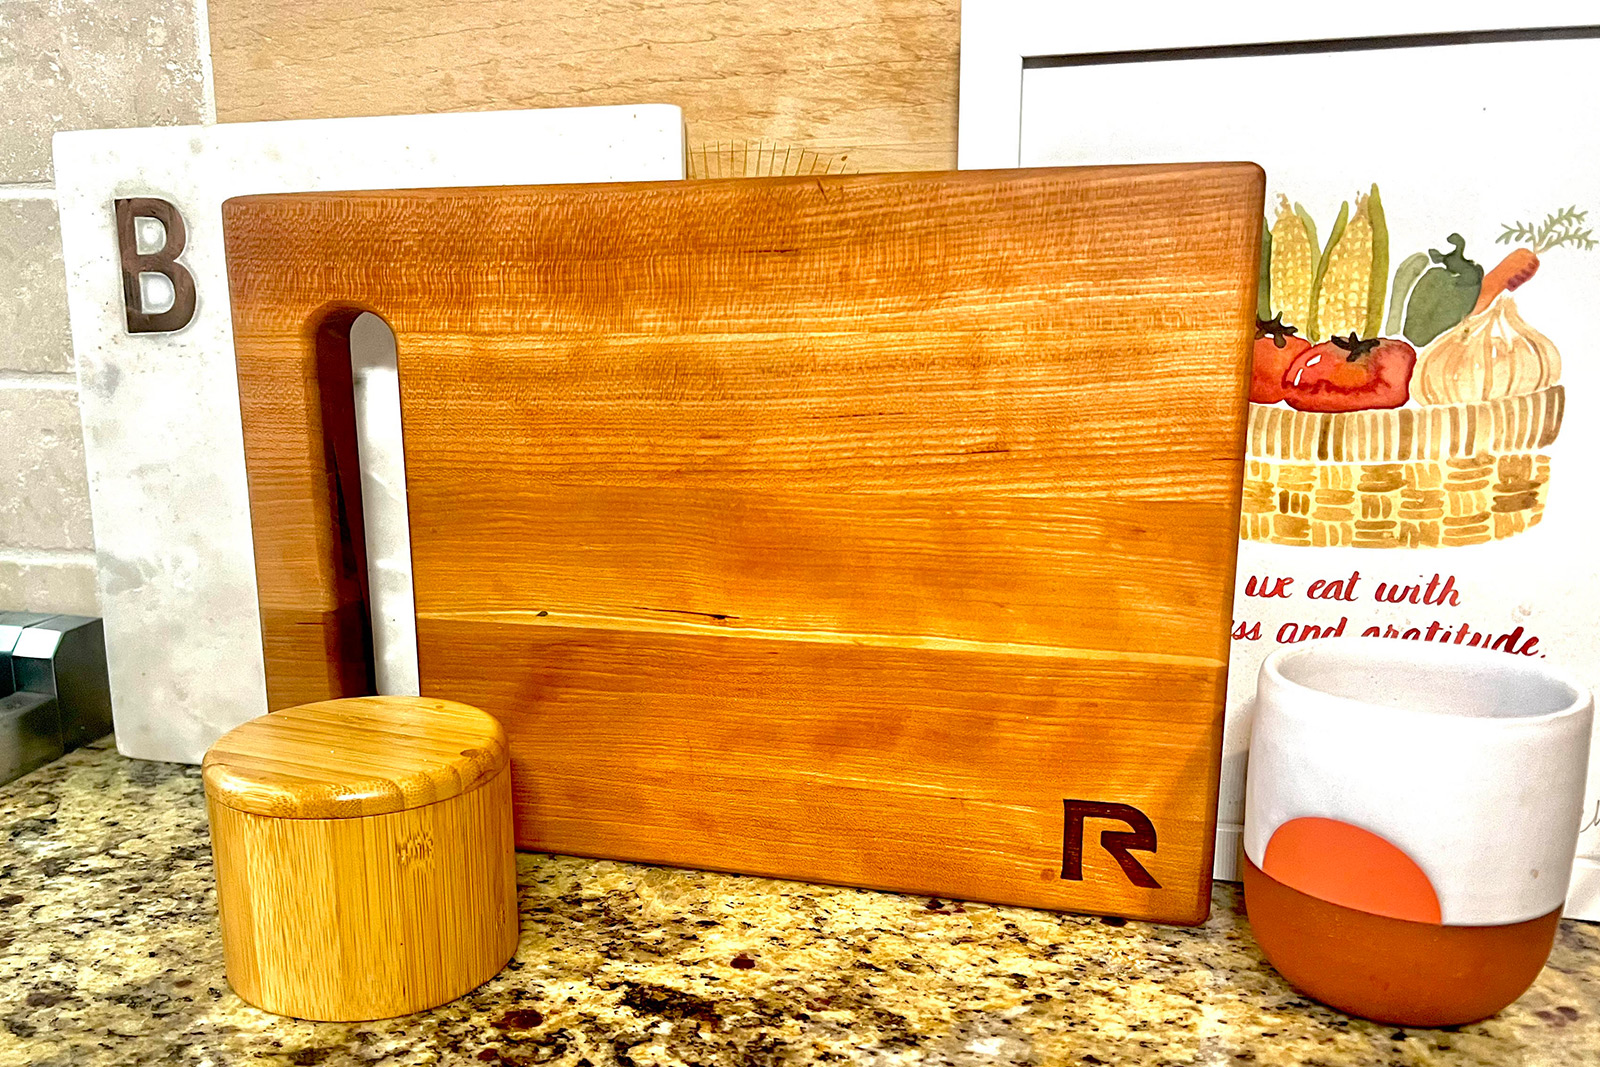 BBQ, cookout, grill cutting board or butcher's block